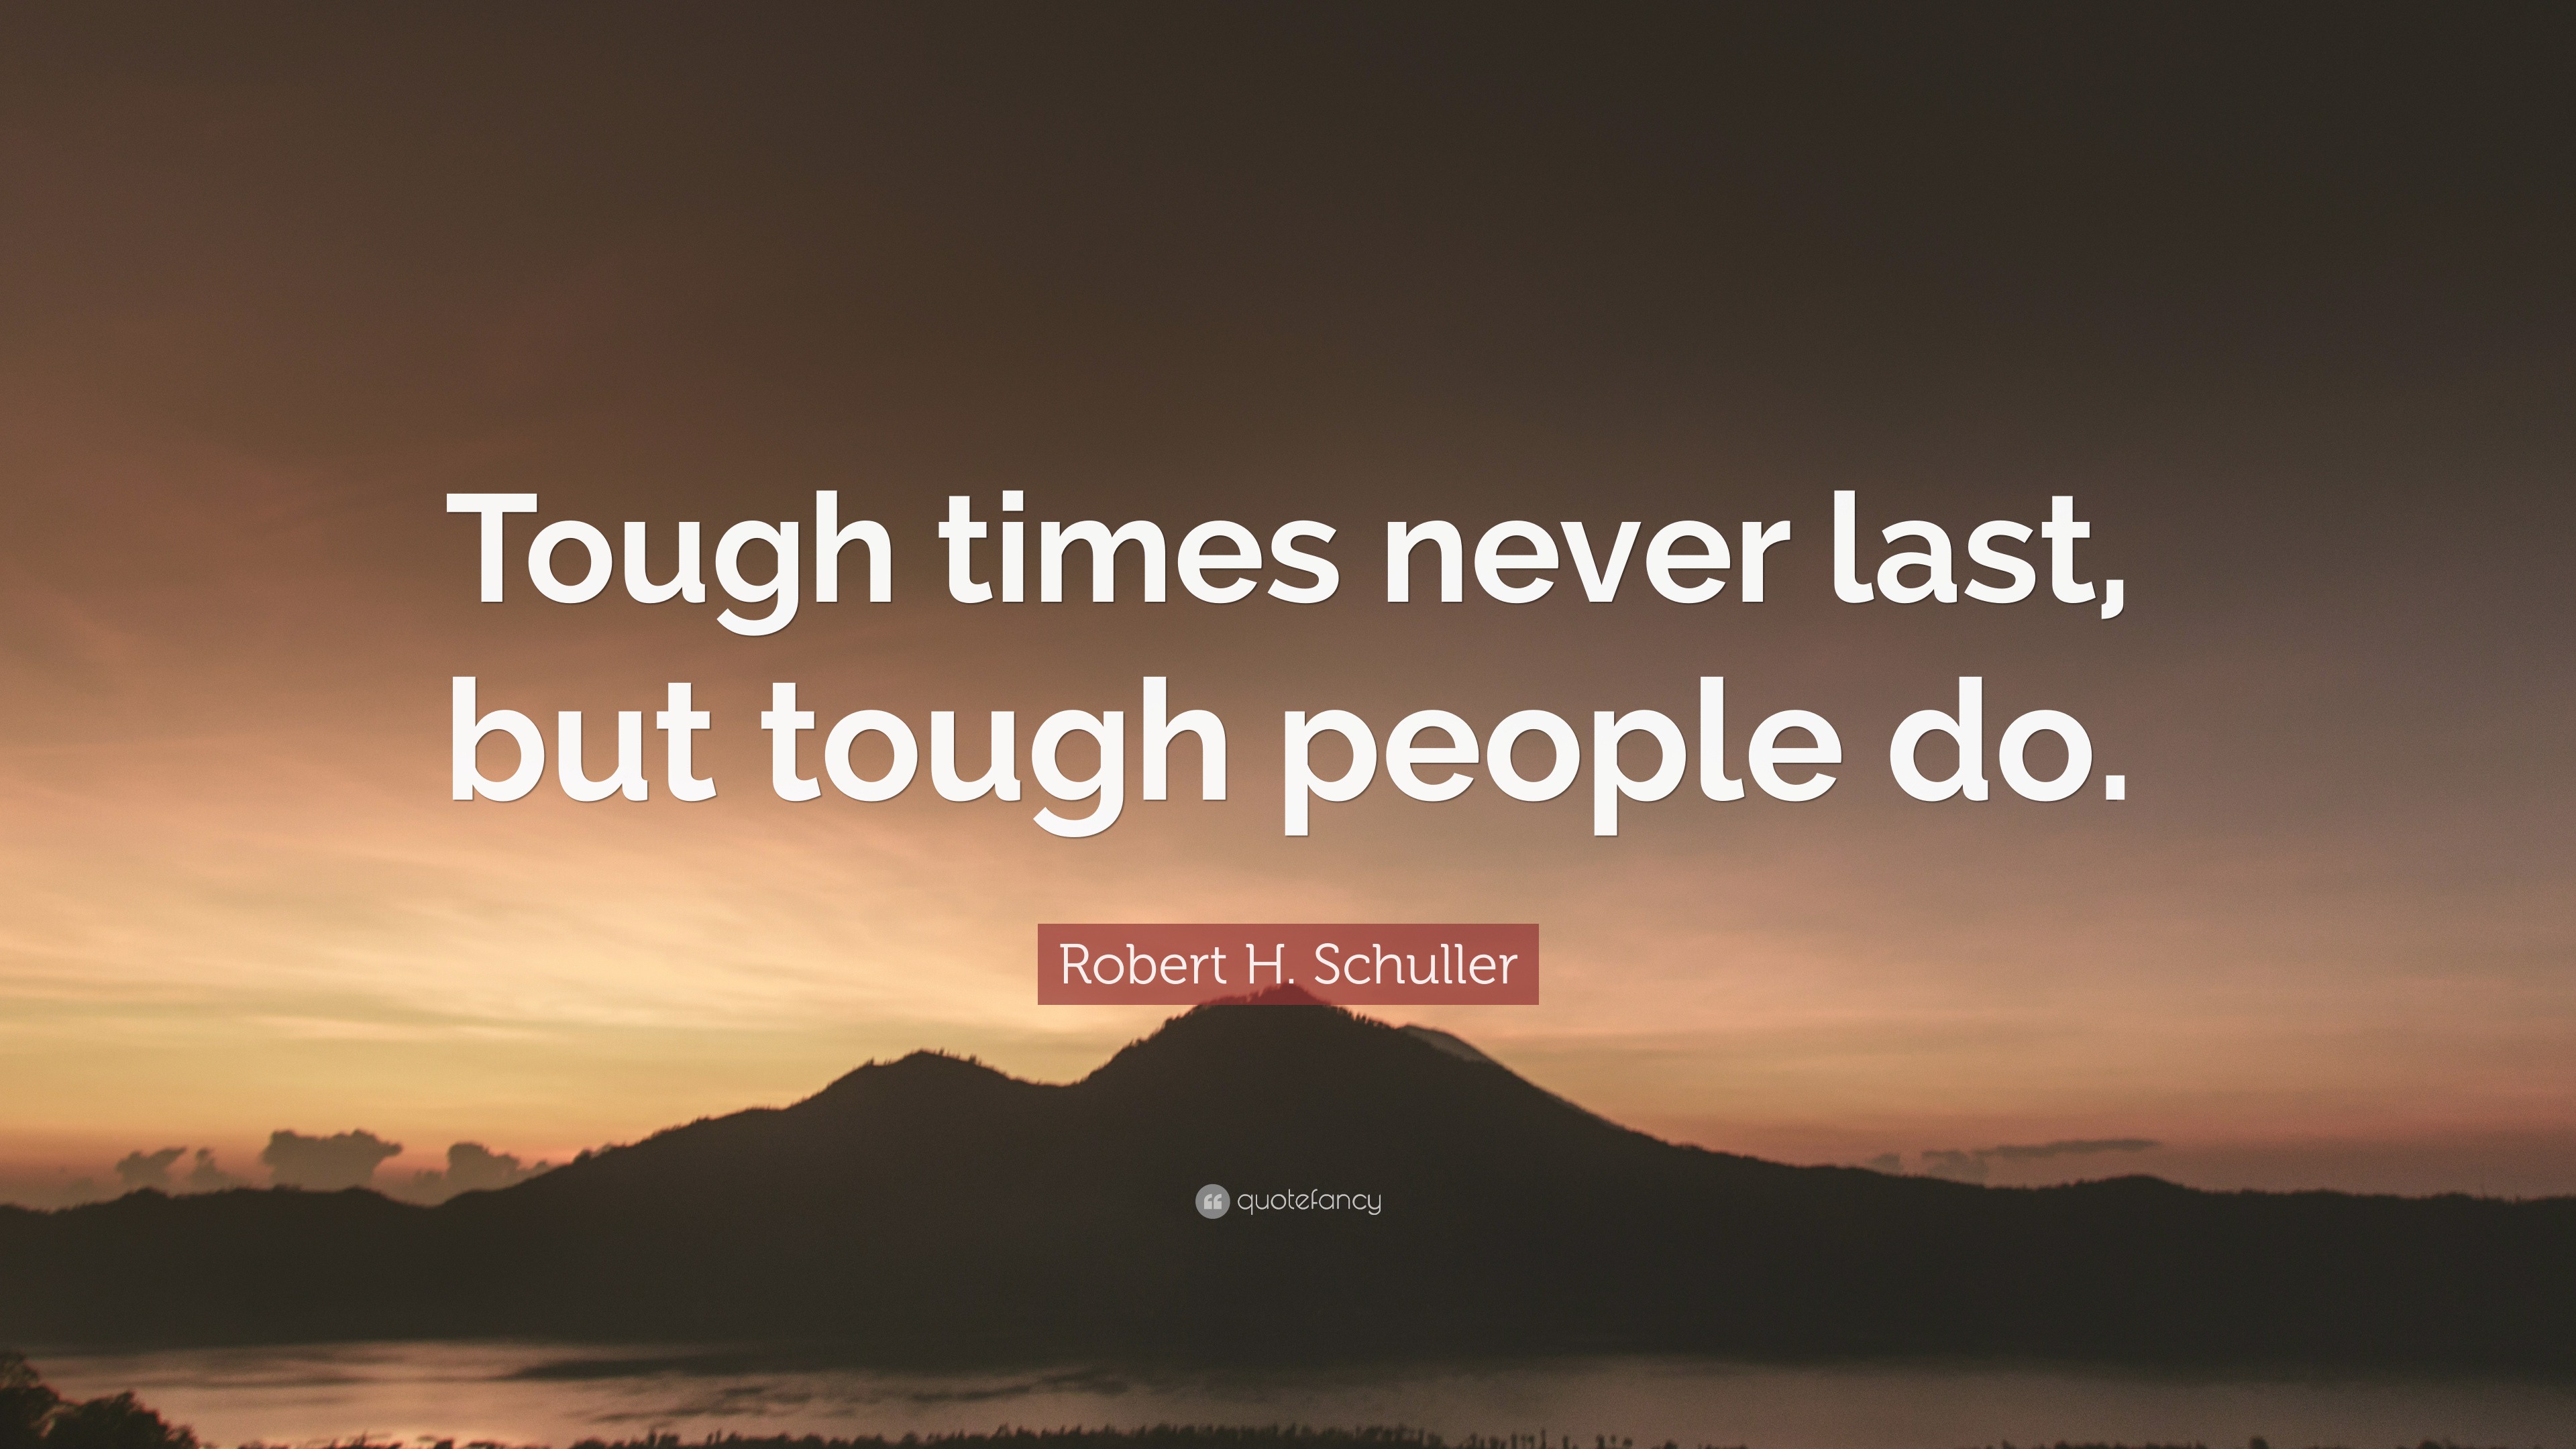 Robert H. Schuller Quote: “Tough times never last, but tough people do.”